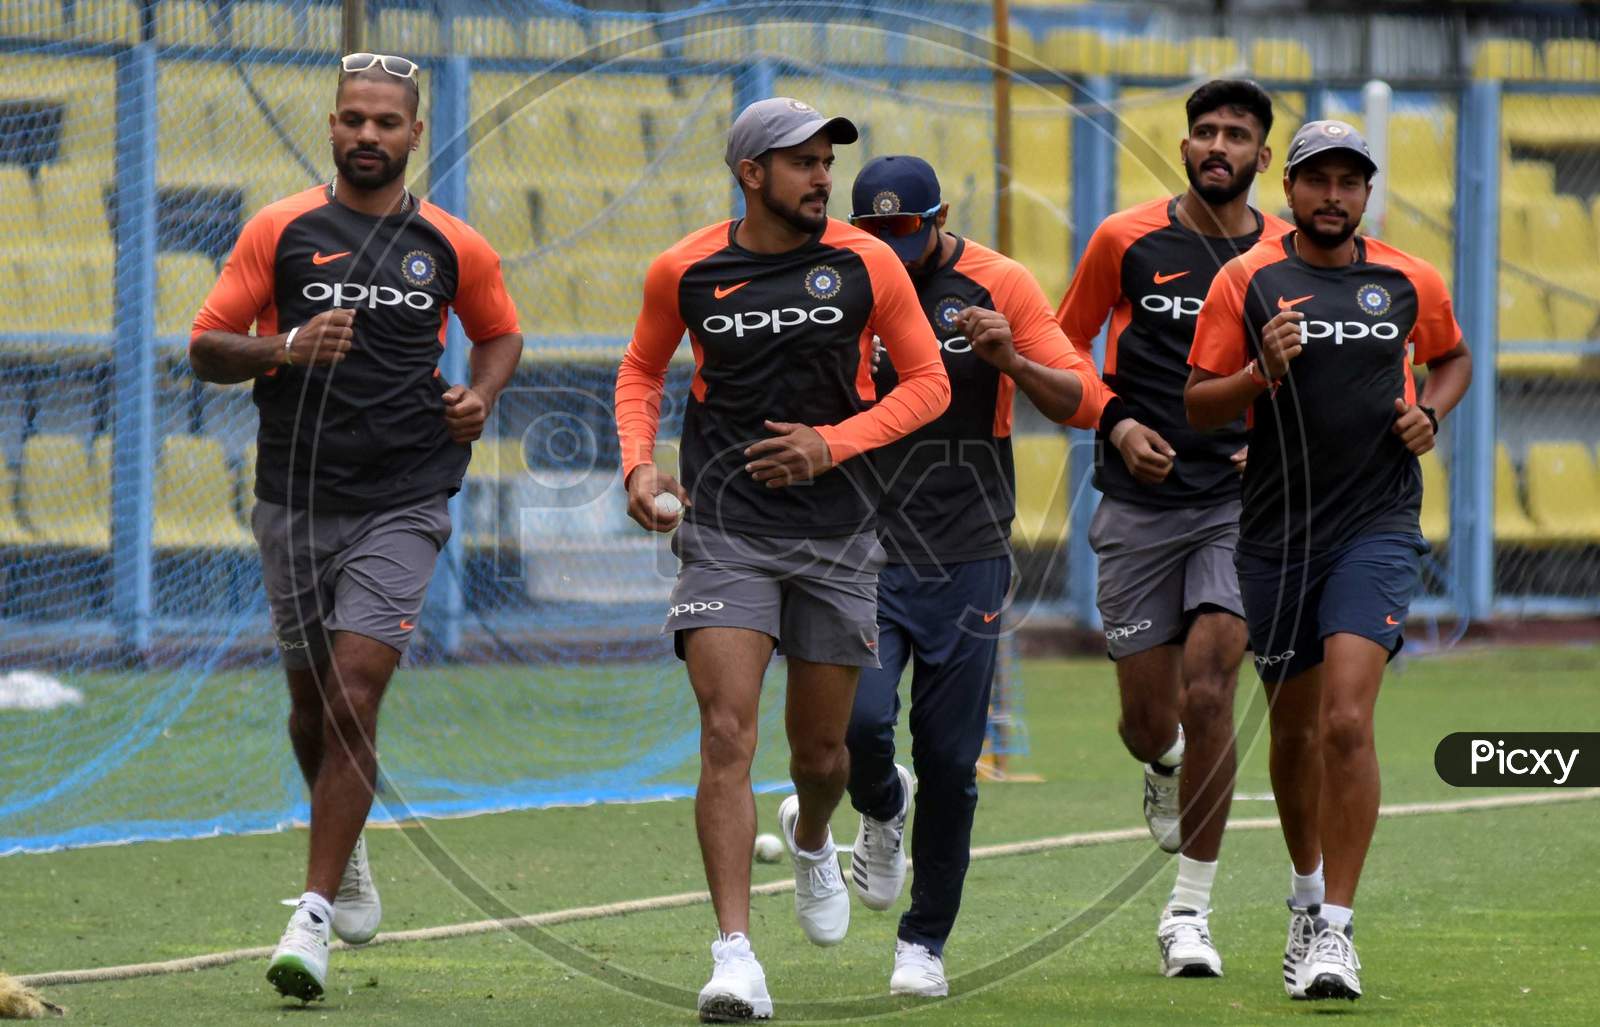 Players Of Team India During A Practice Session Ahead Of The First One Day International Cricket Match Against West Indies, At Aca Cricket Stadium, Barsapara In Guwahati